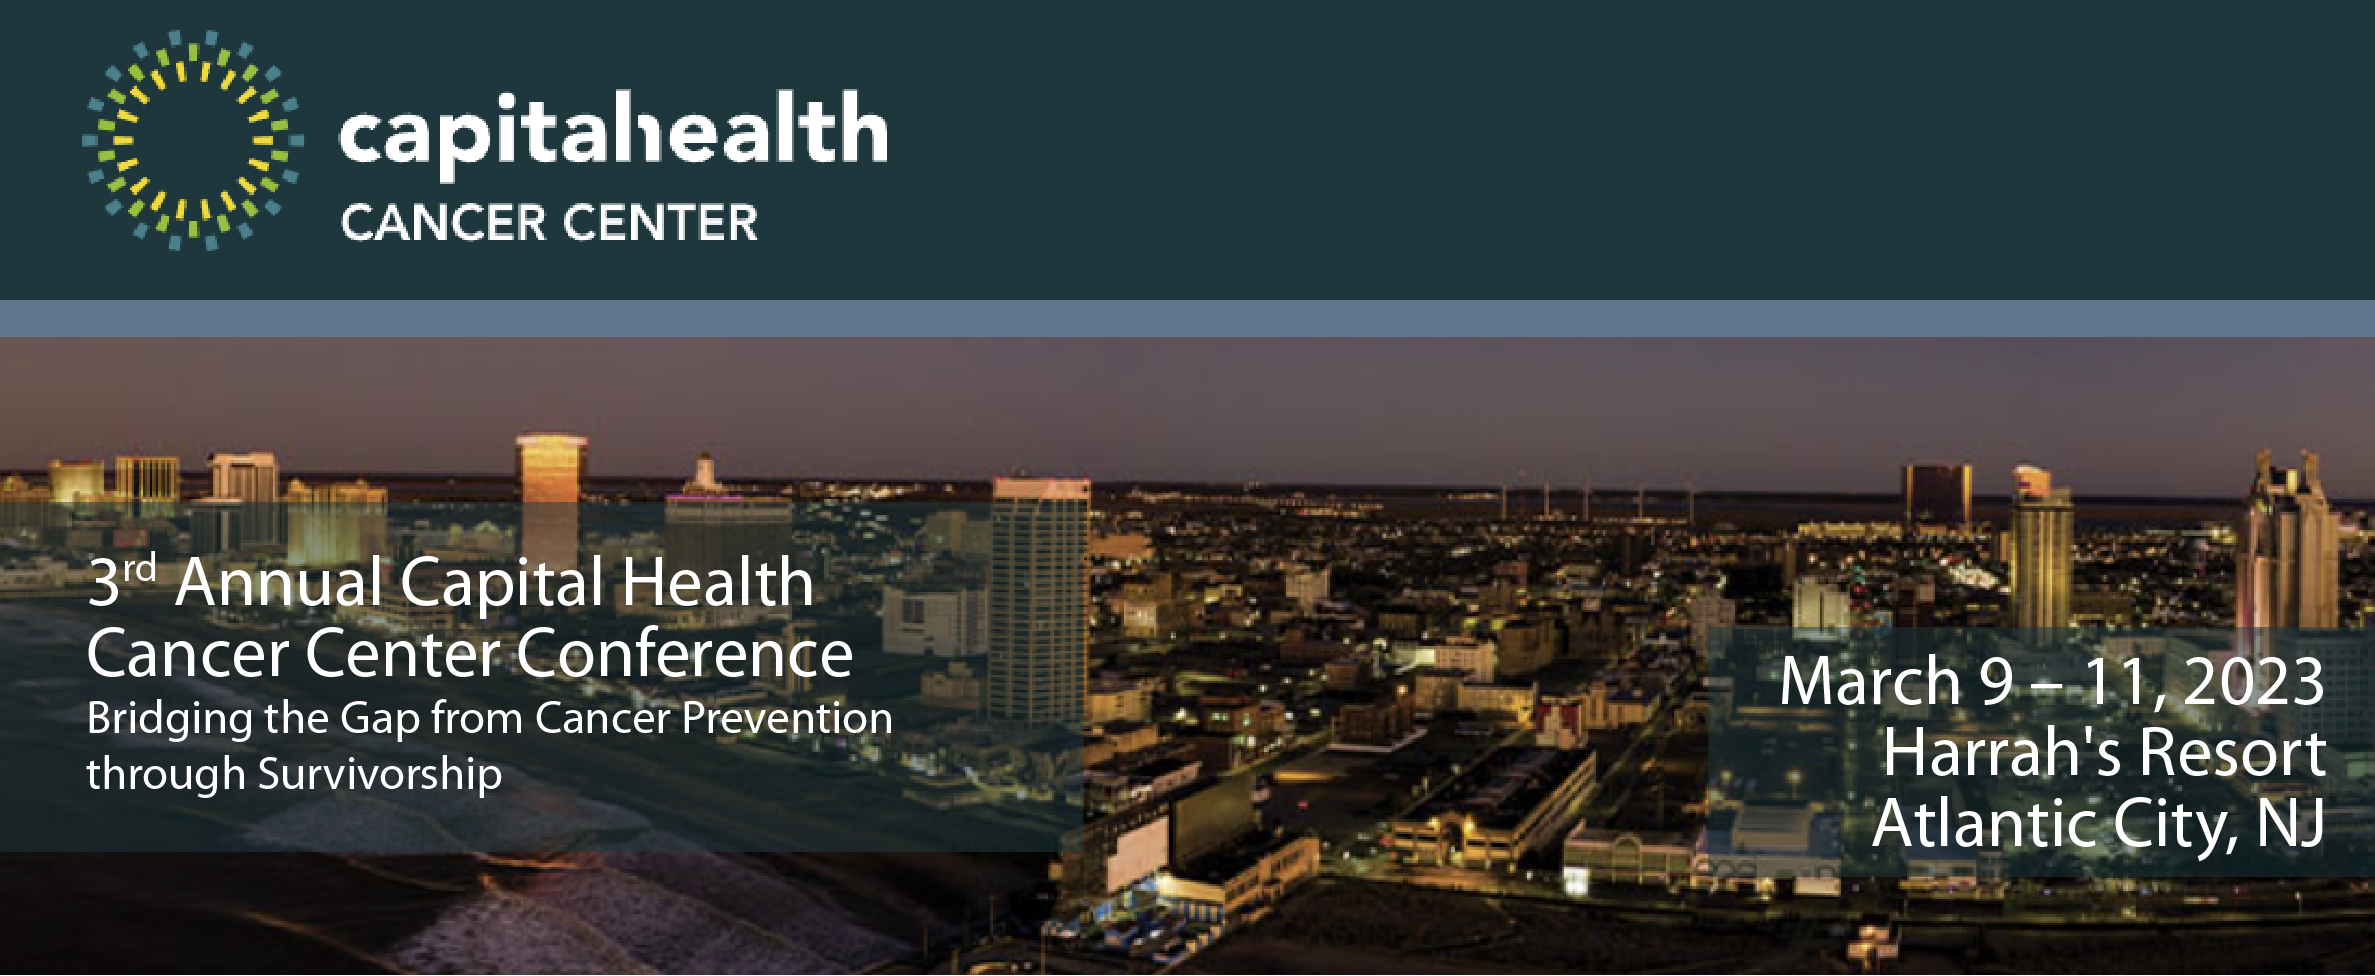 3rd Annual Capital Health Cancer Center Conference 2023